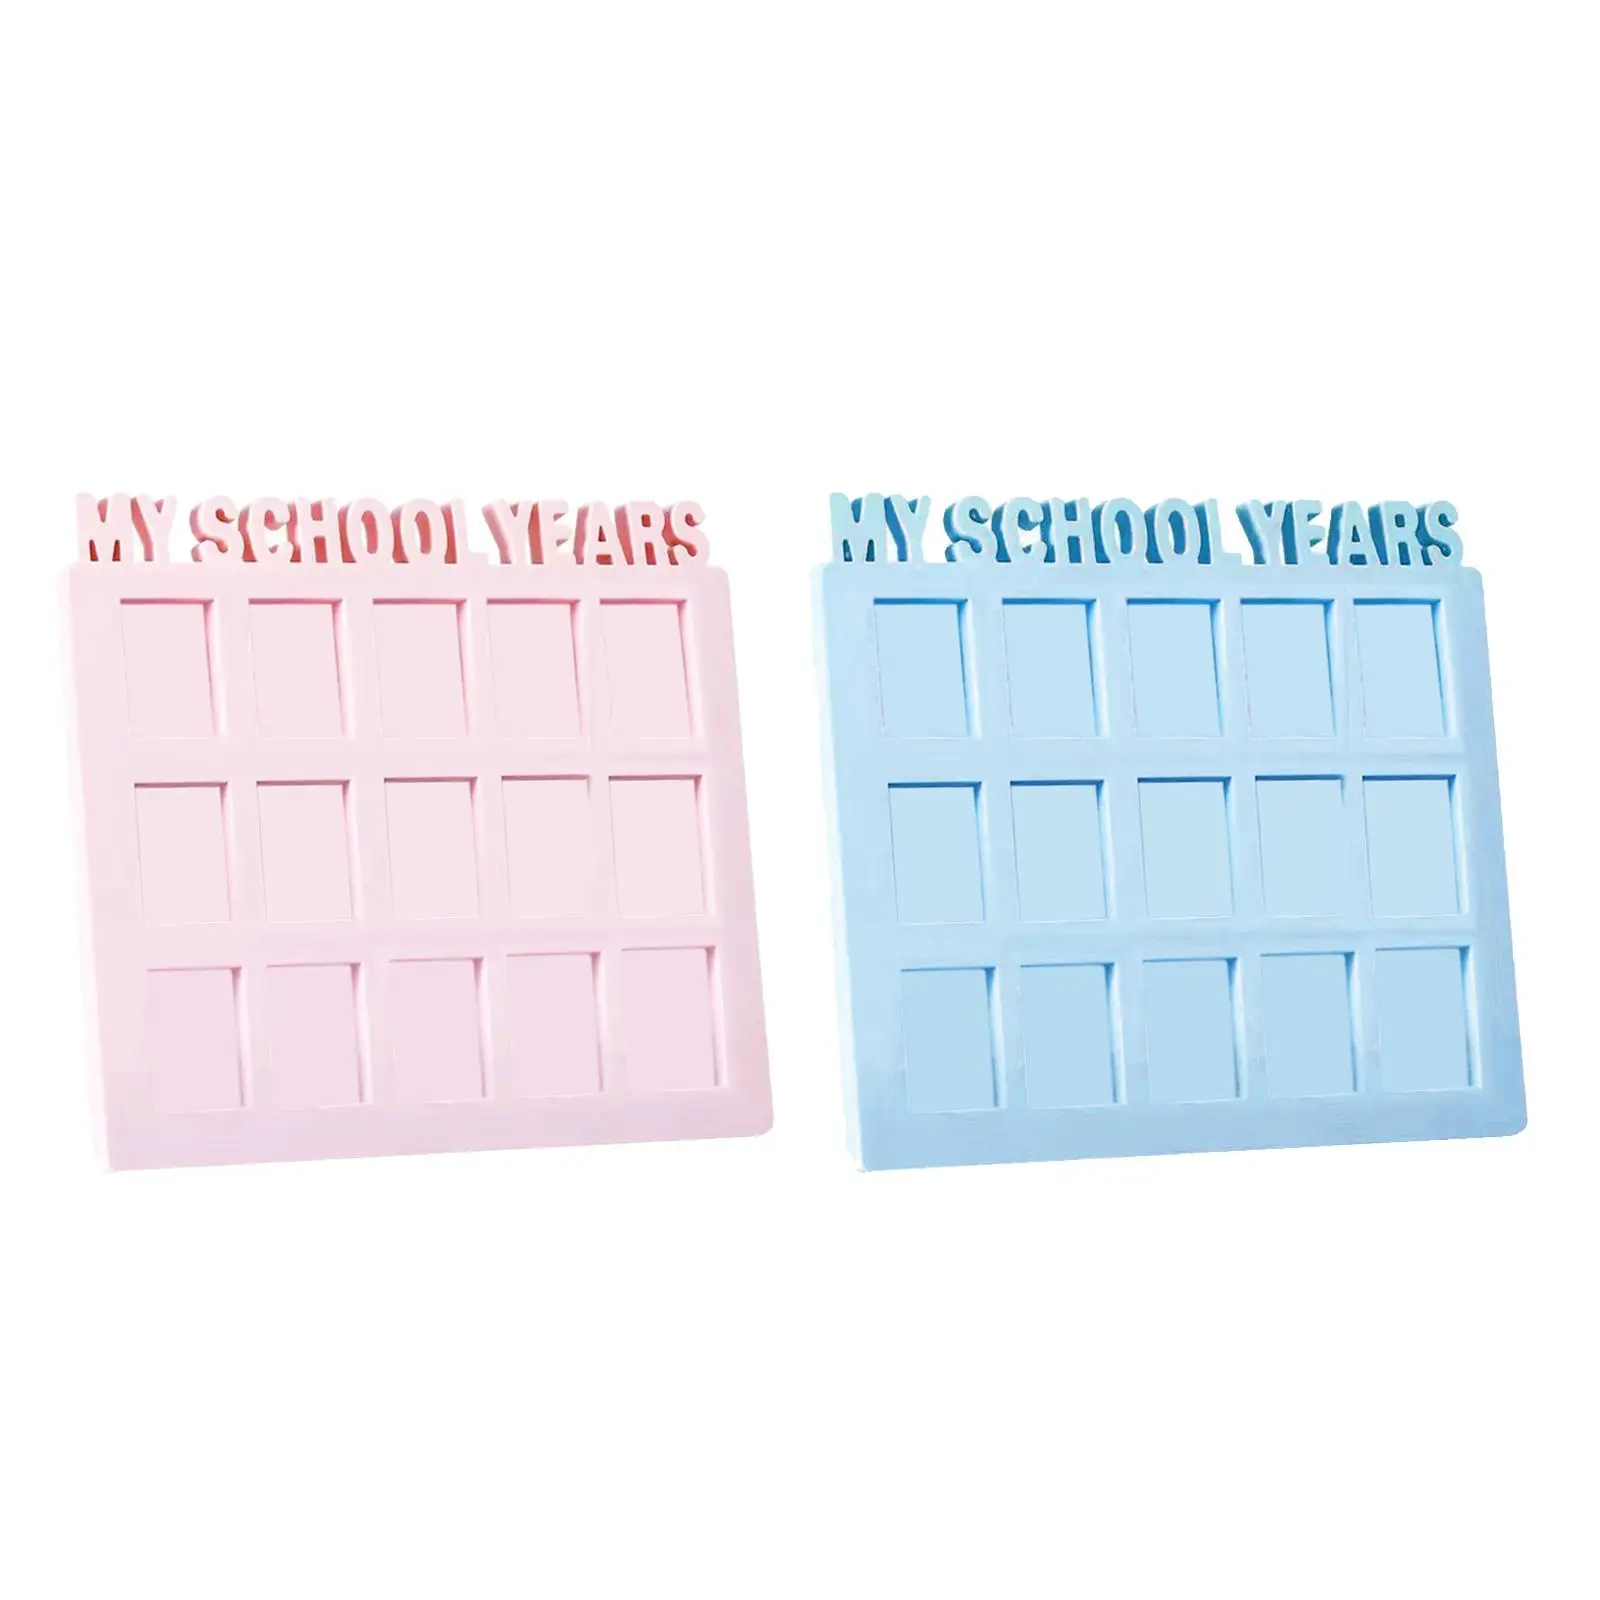 School Years Picture Frame Gift Graduation Photo Frame Displays 15 1.6x2